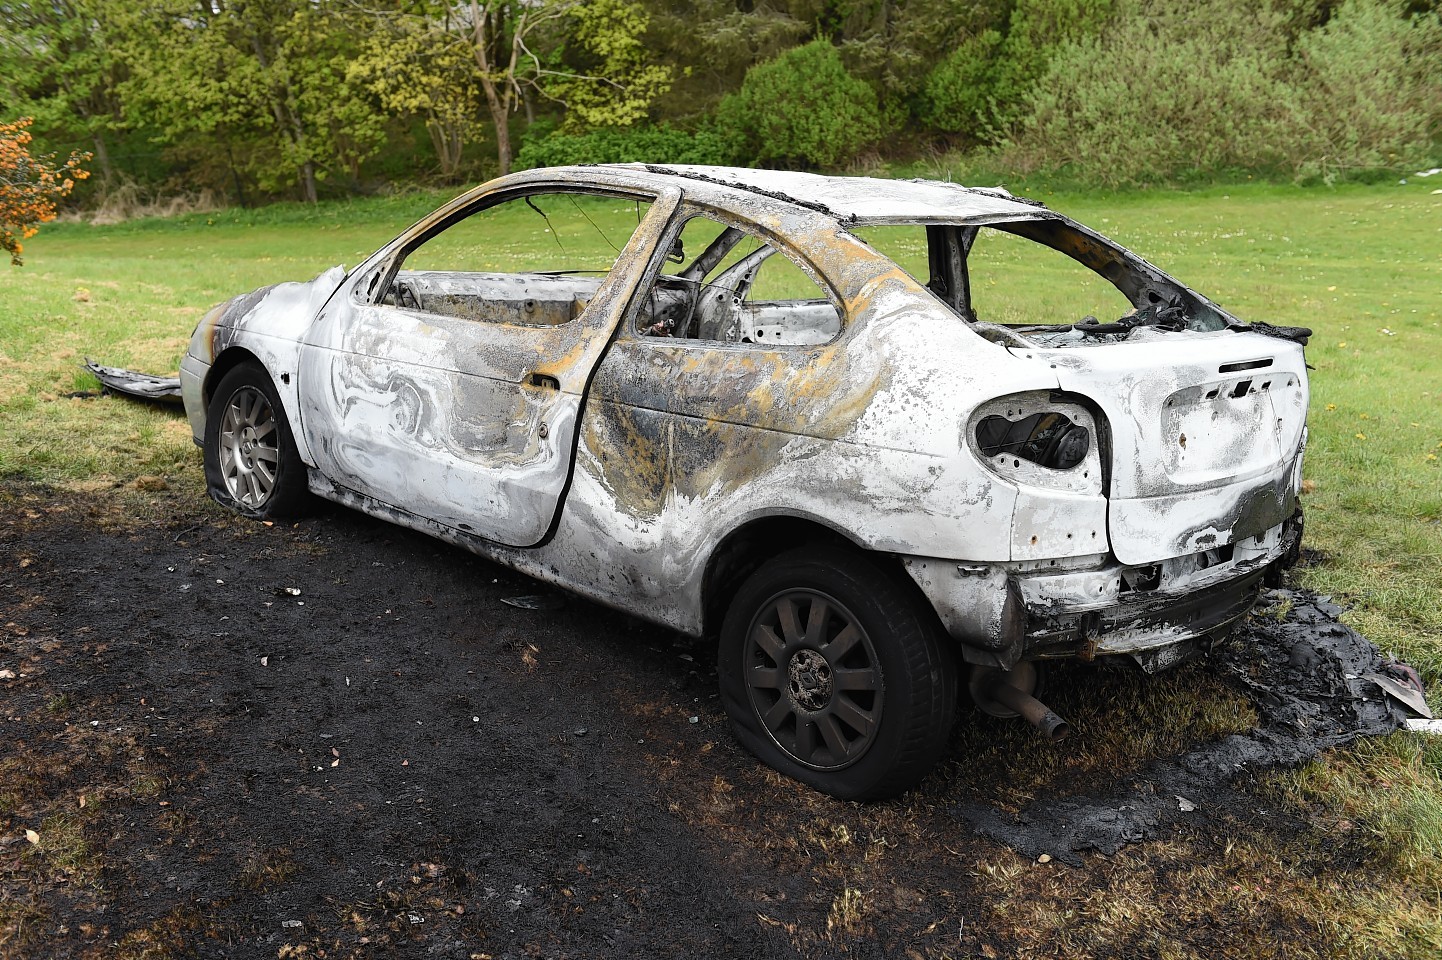 The remains of the burnt out car. Picture and video by Kenny Elrick